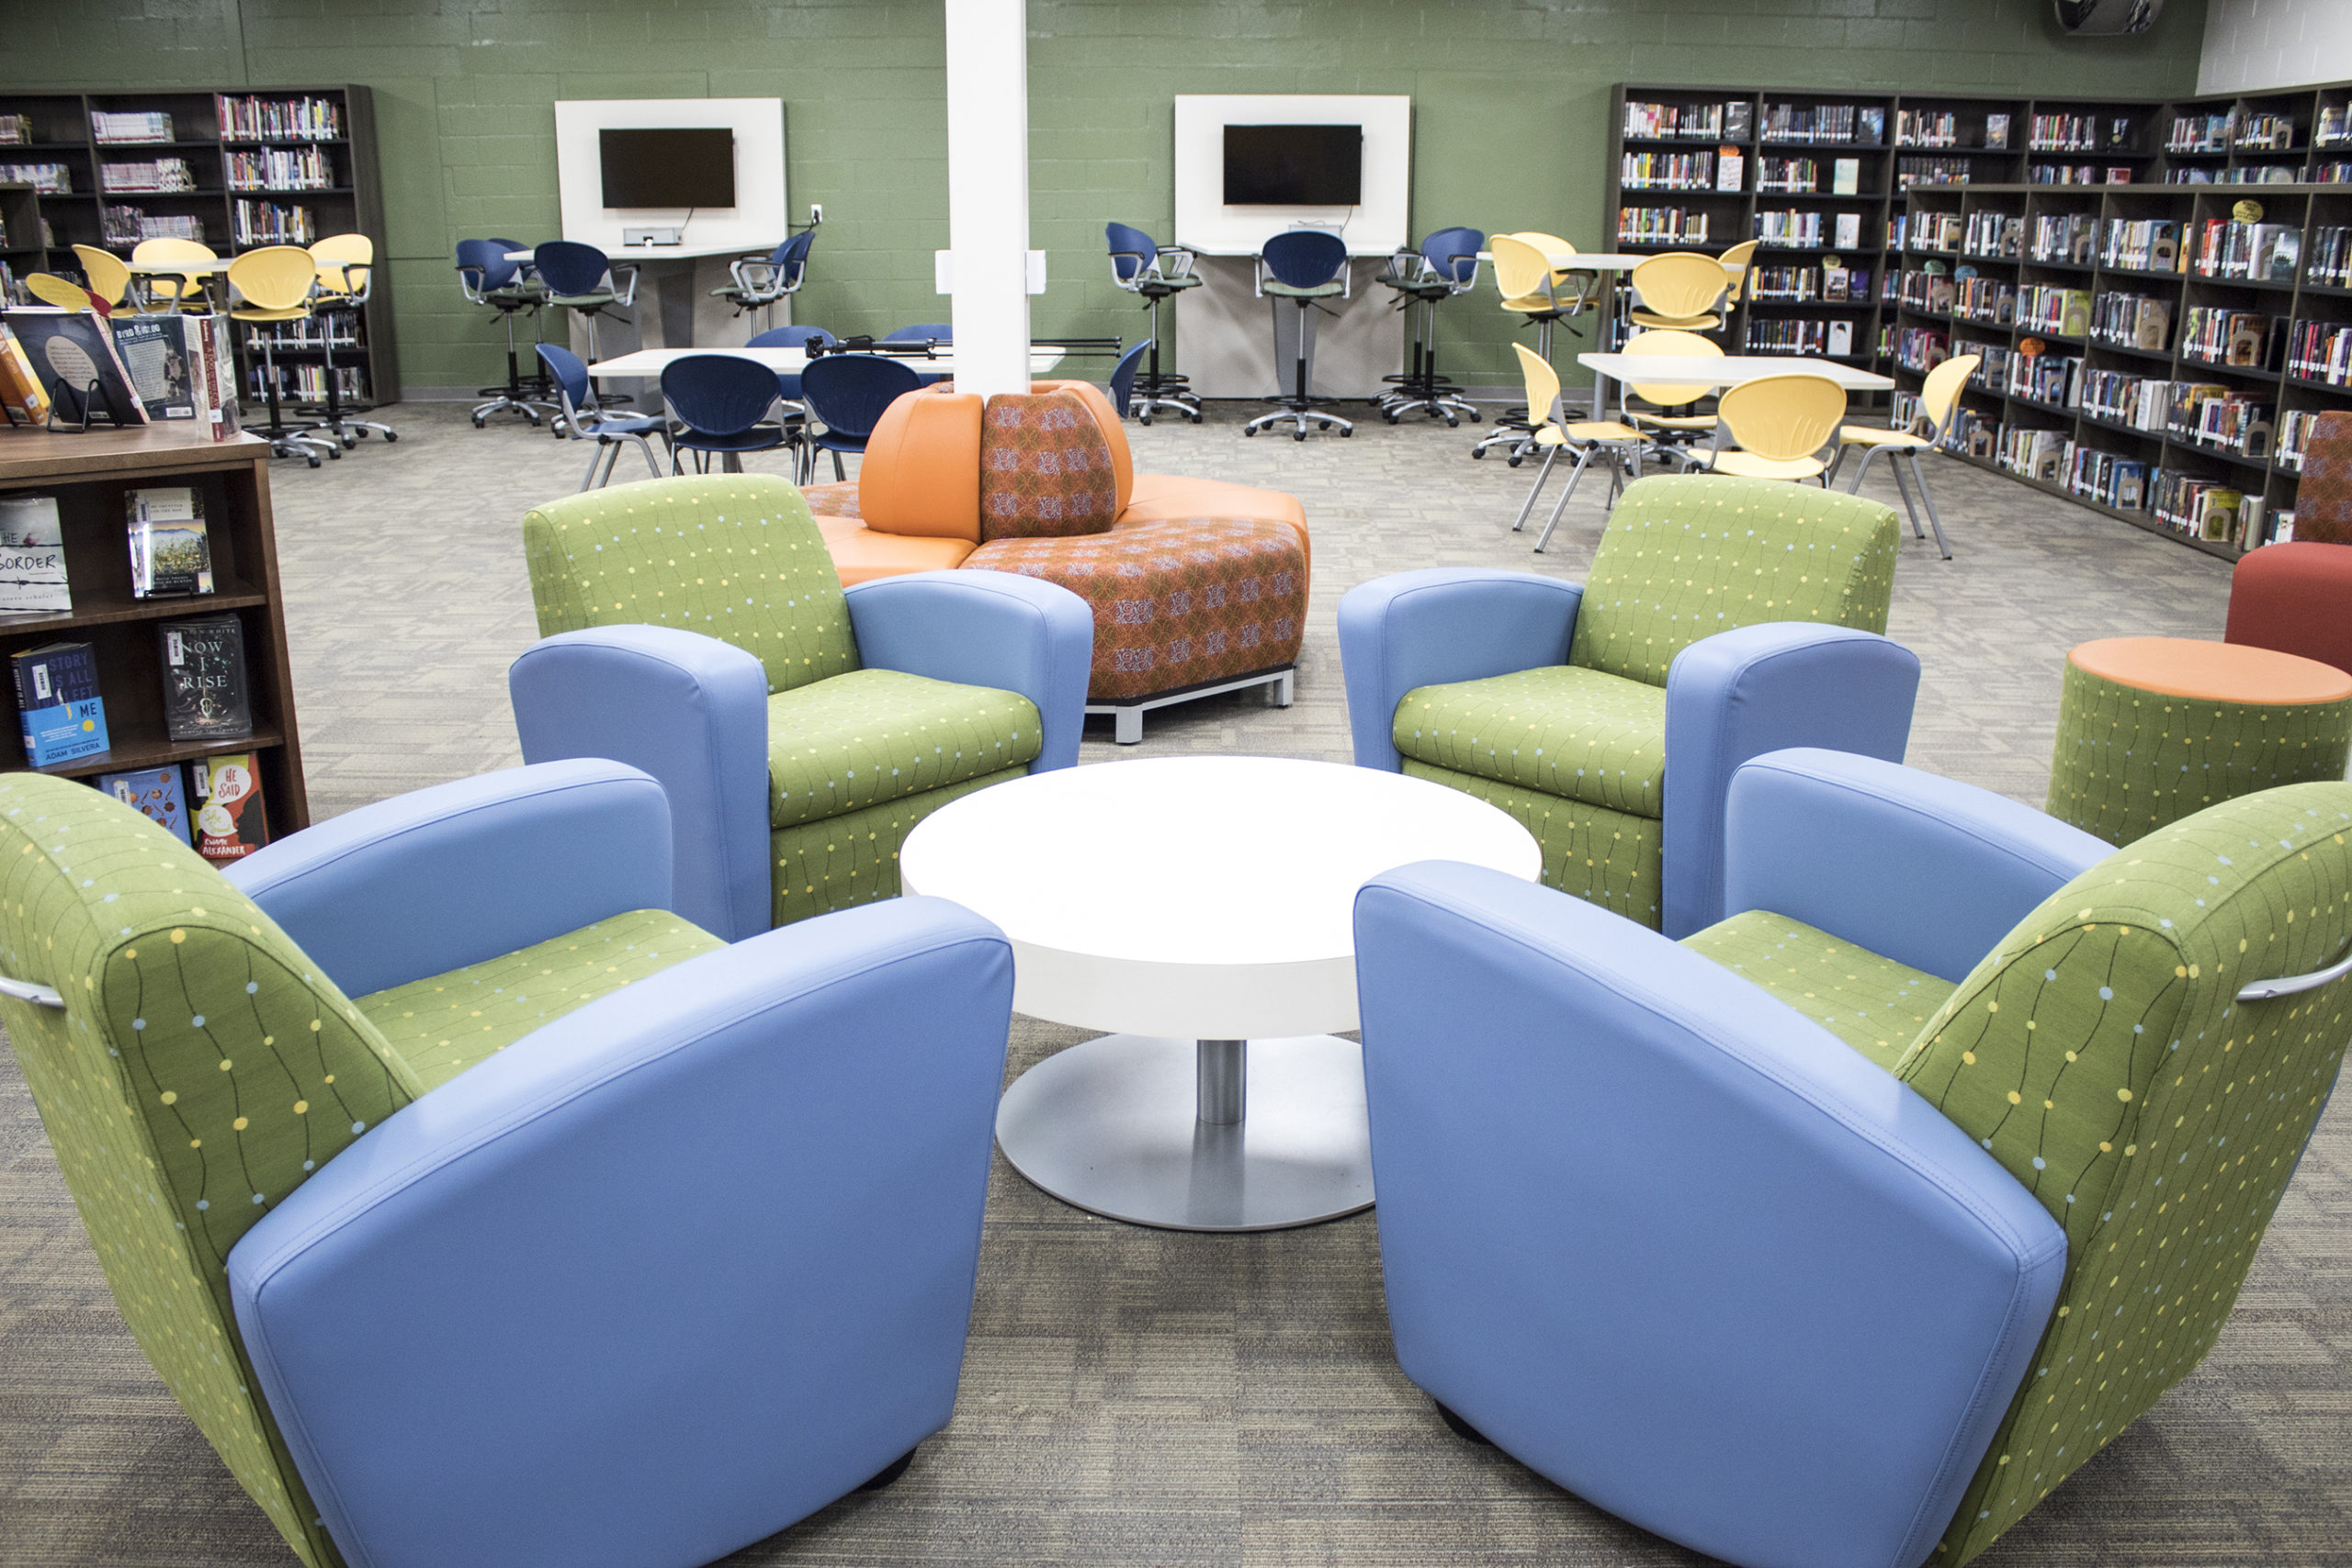 Library Reno Mobile Seat Lounges with Tble